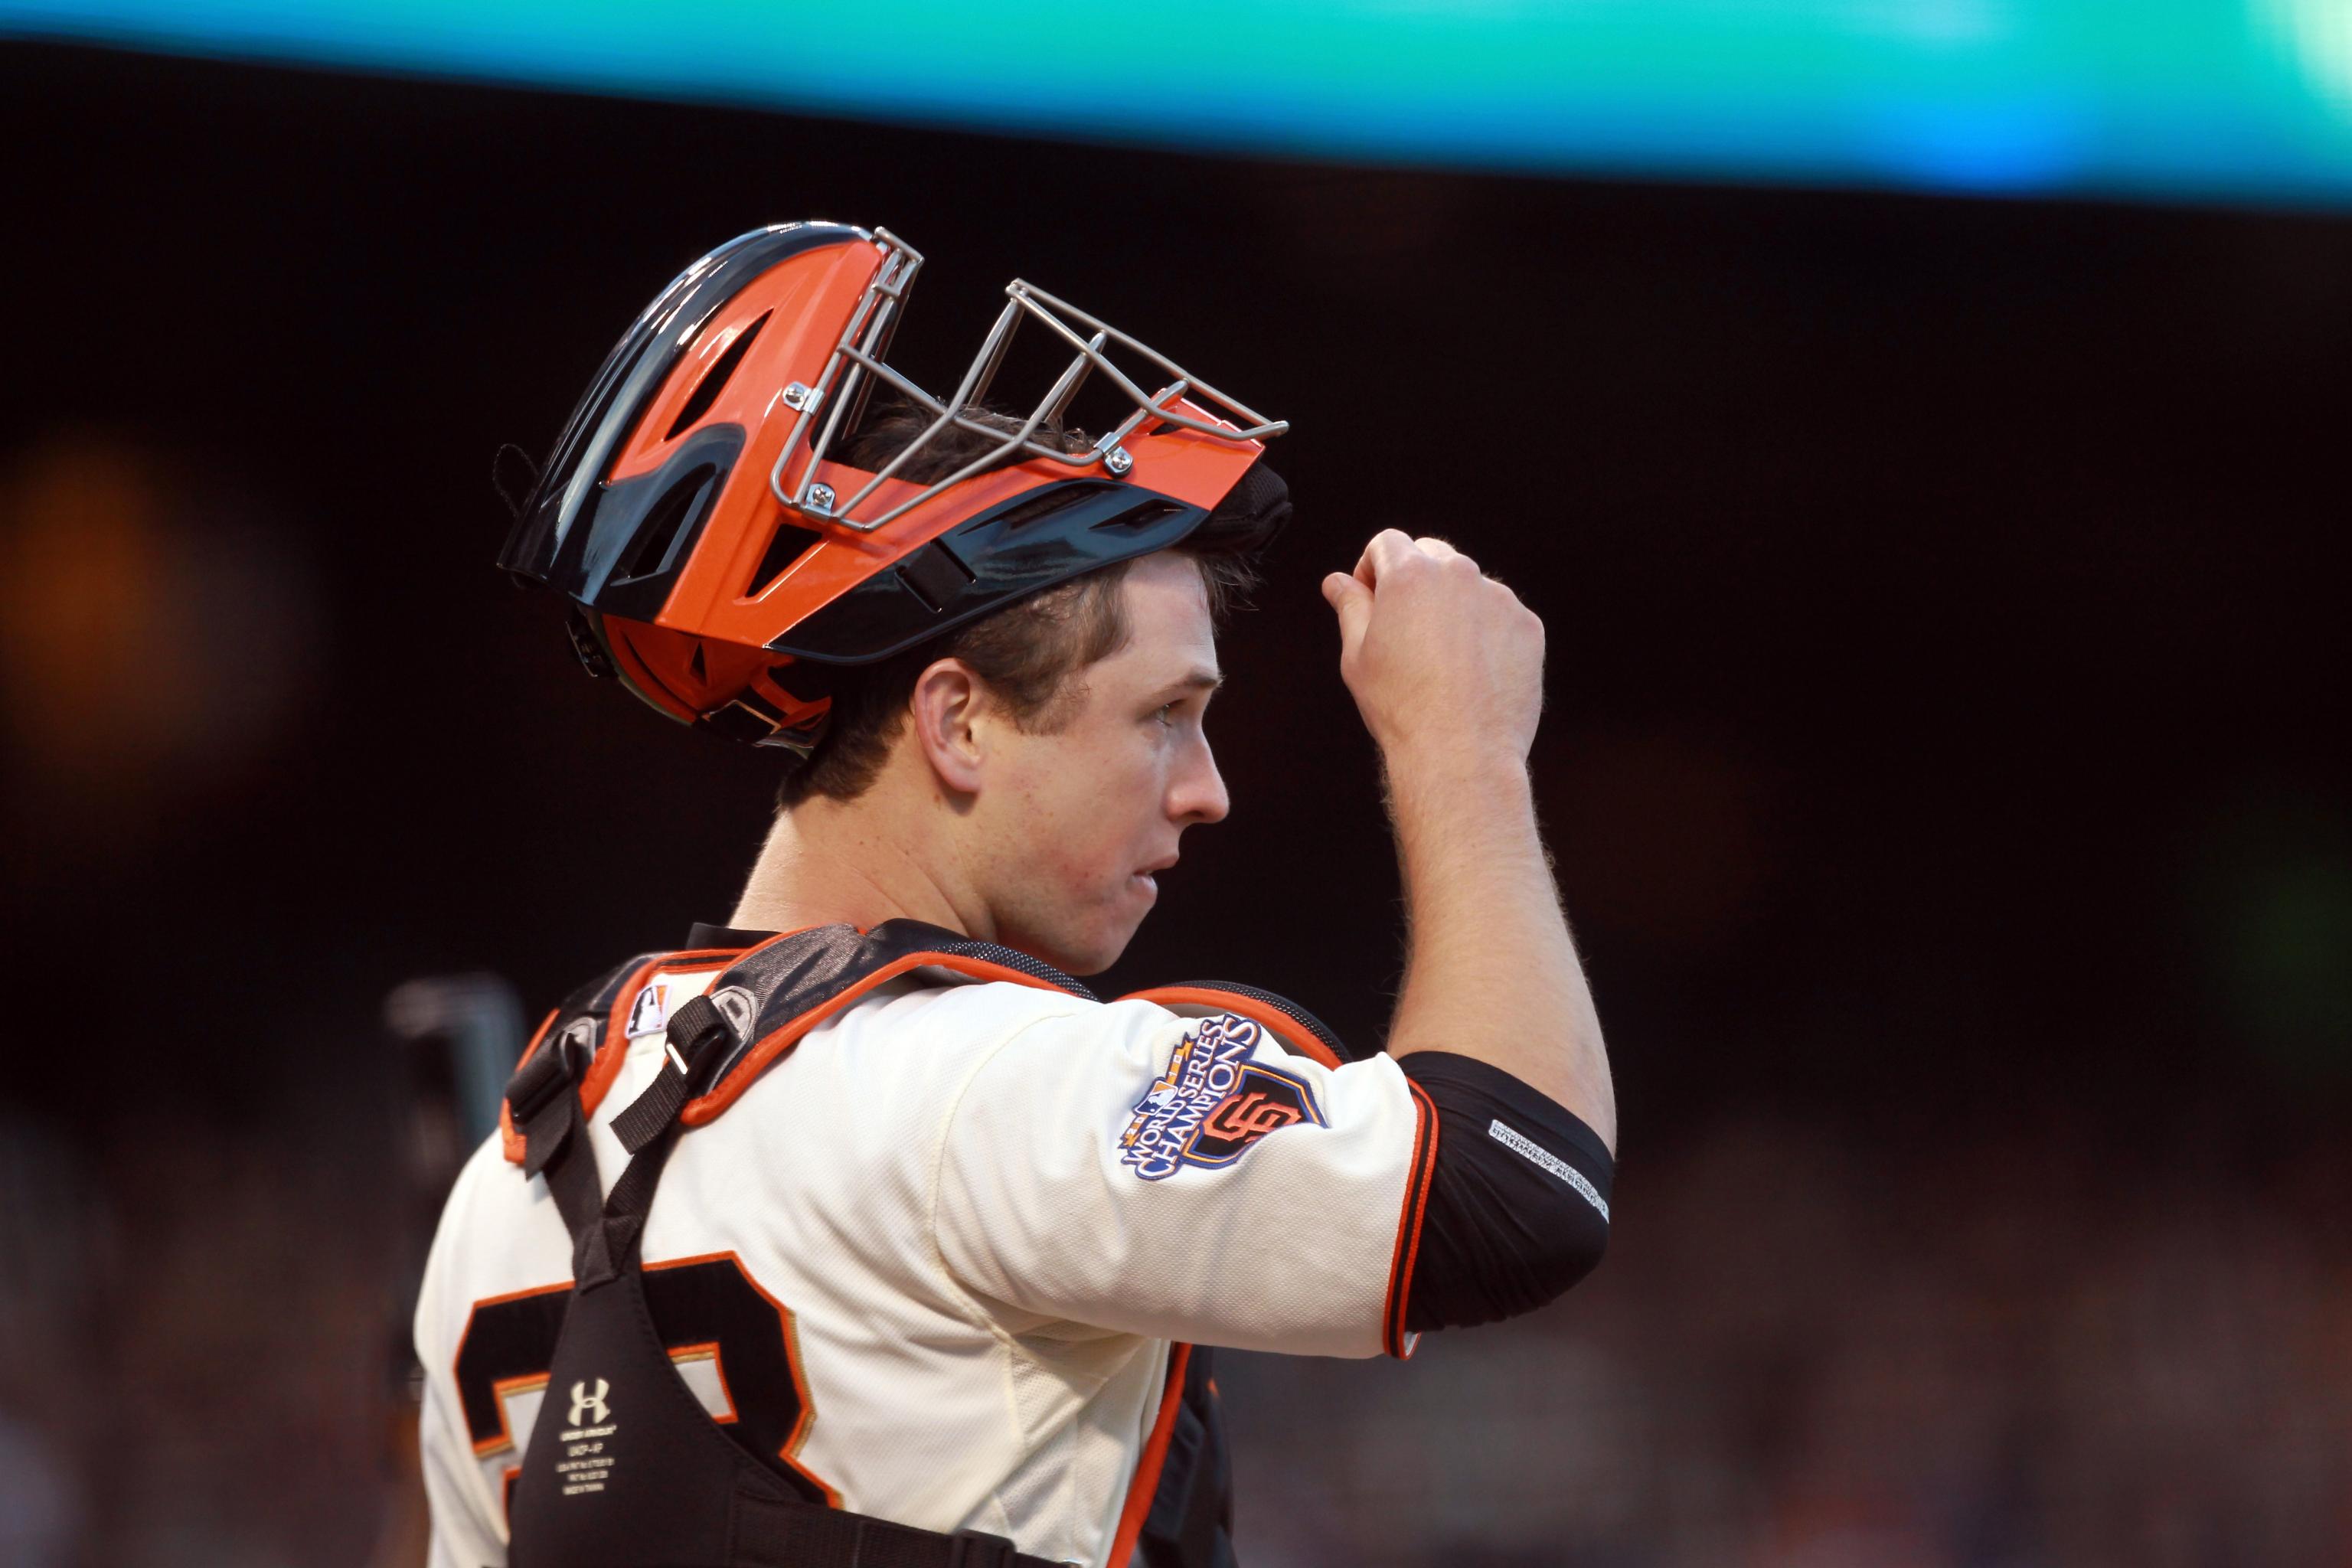 Buster Posey's postseason troubles continue in Game 6